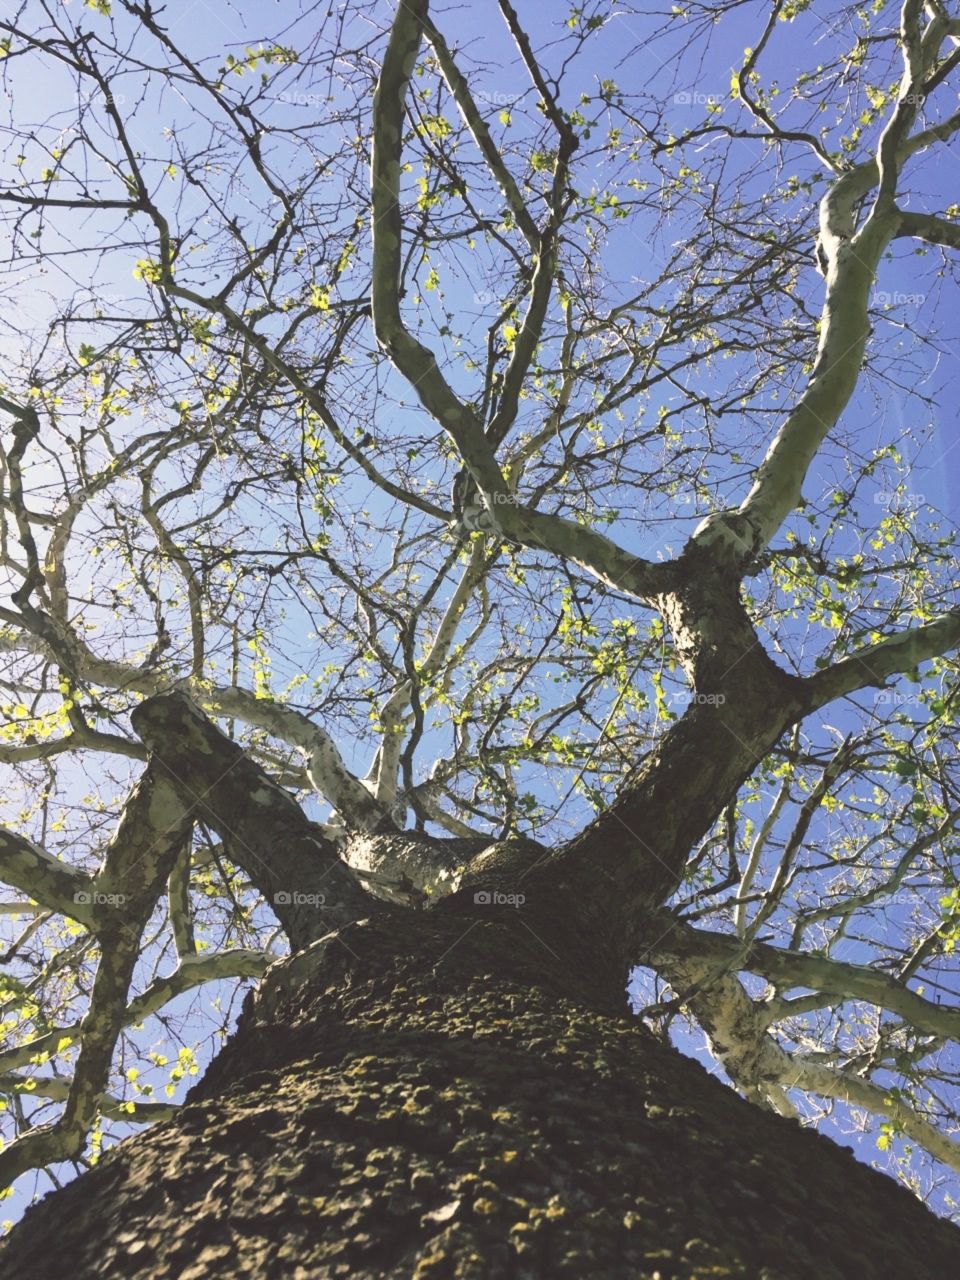 Sycamore Tree Trunk - view from base of giant sycamore tree sprouting new leaves on a bright day under a clear blue sky